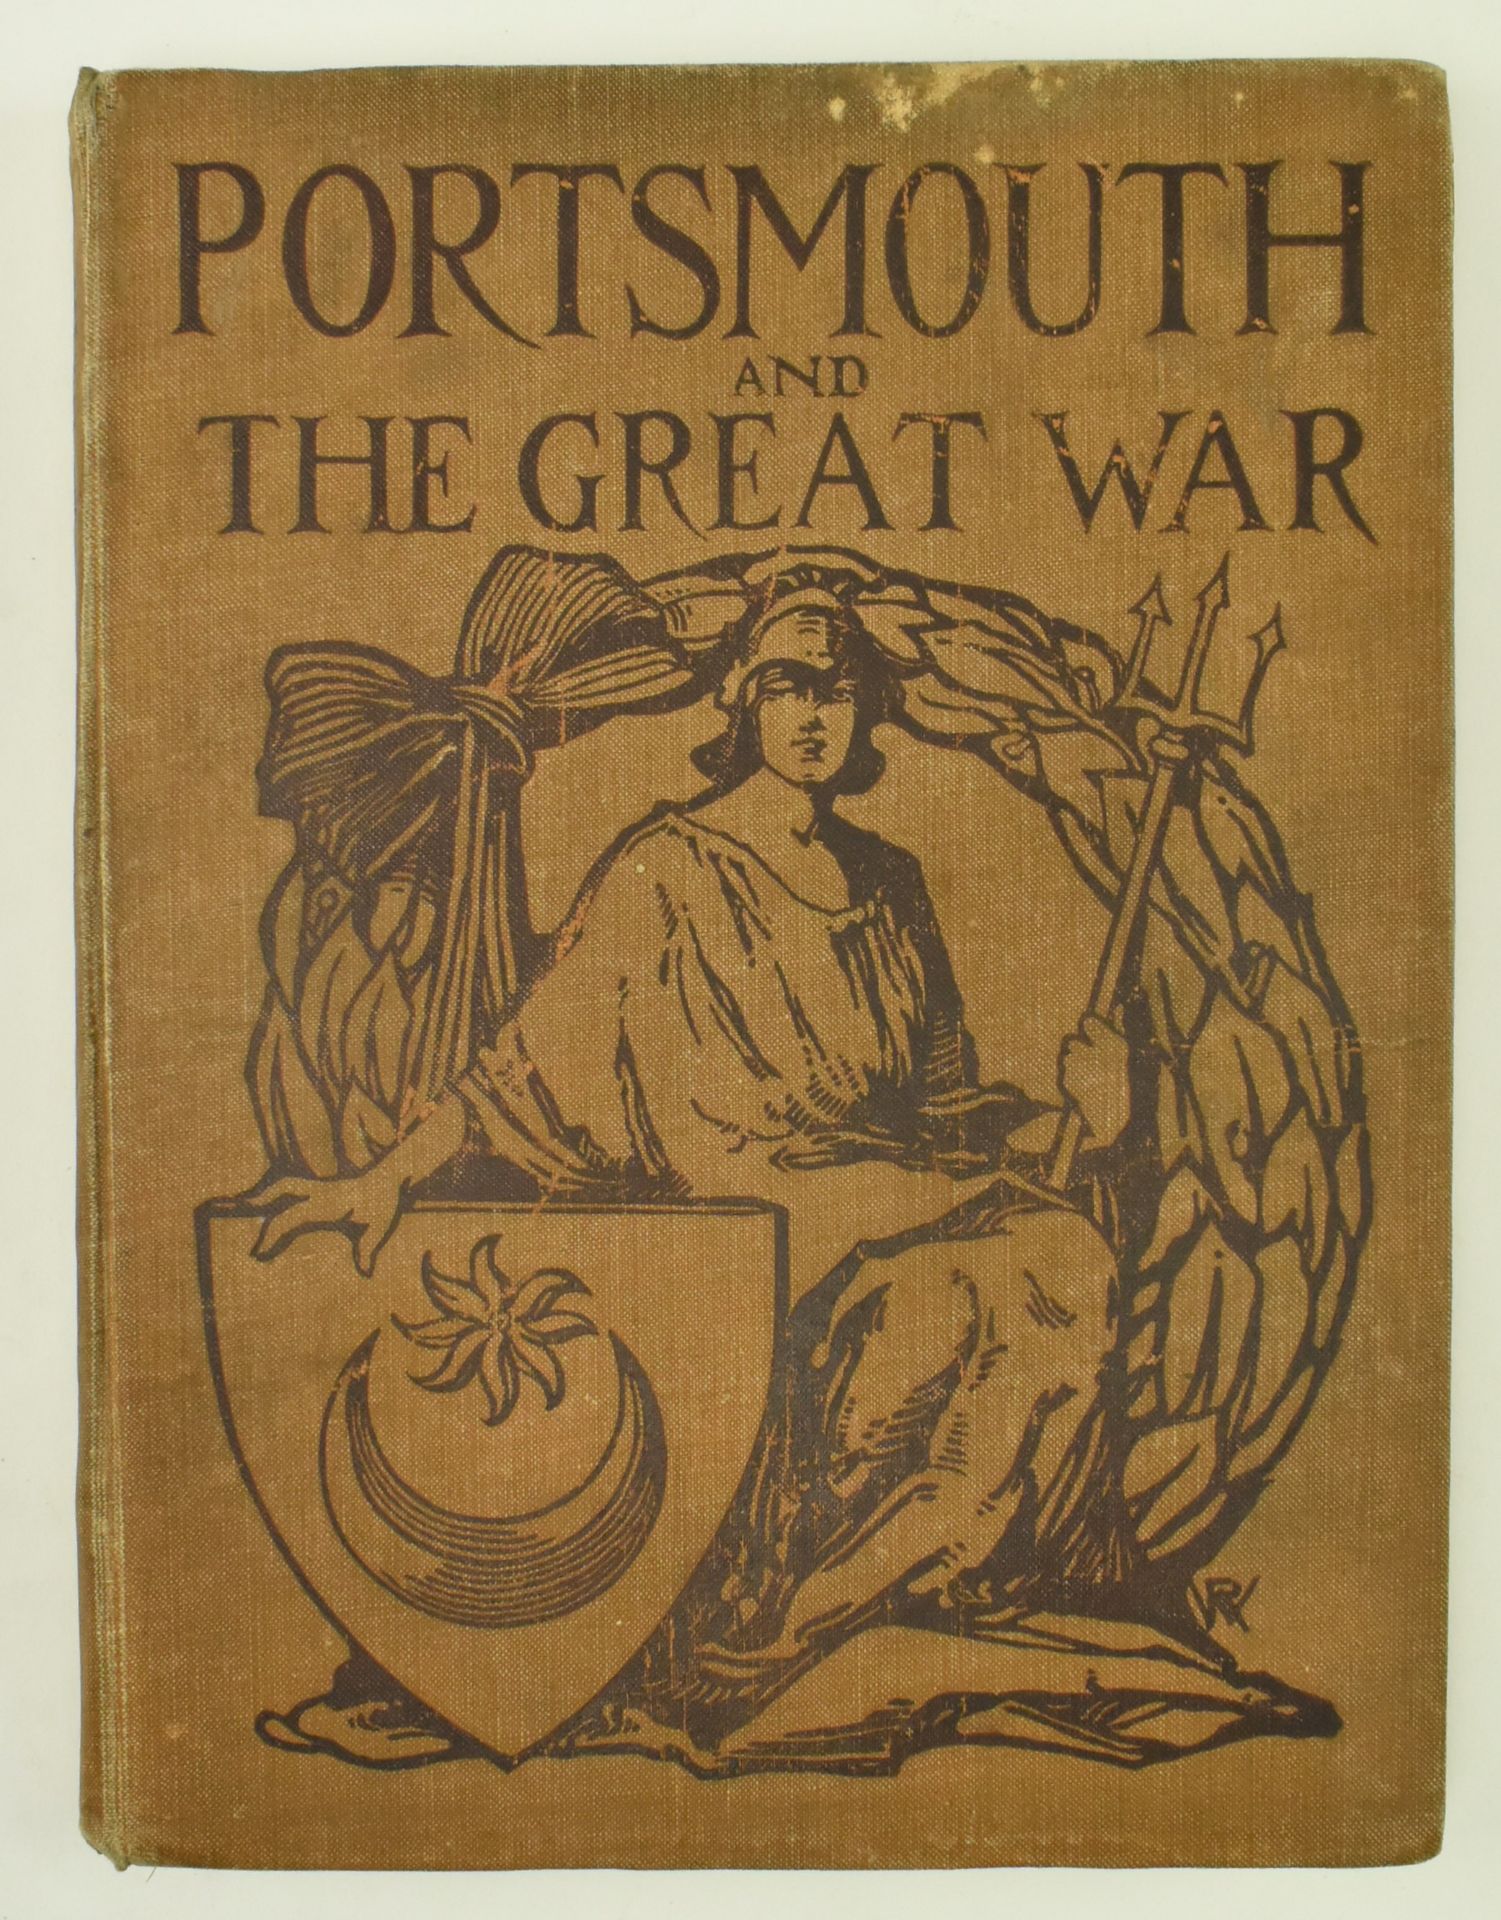 MILITARY WWI INTEREST. COLLECTION OF BOOKS ON THE GREAT WAR - Image 5 of 10